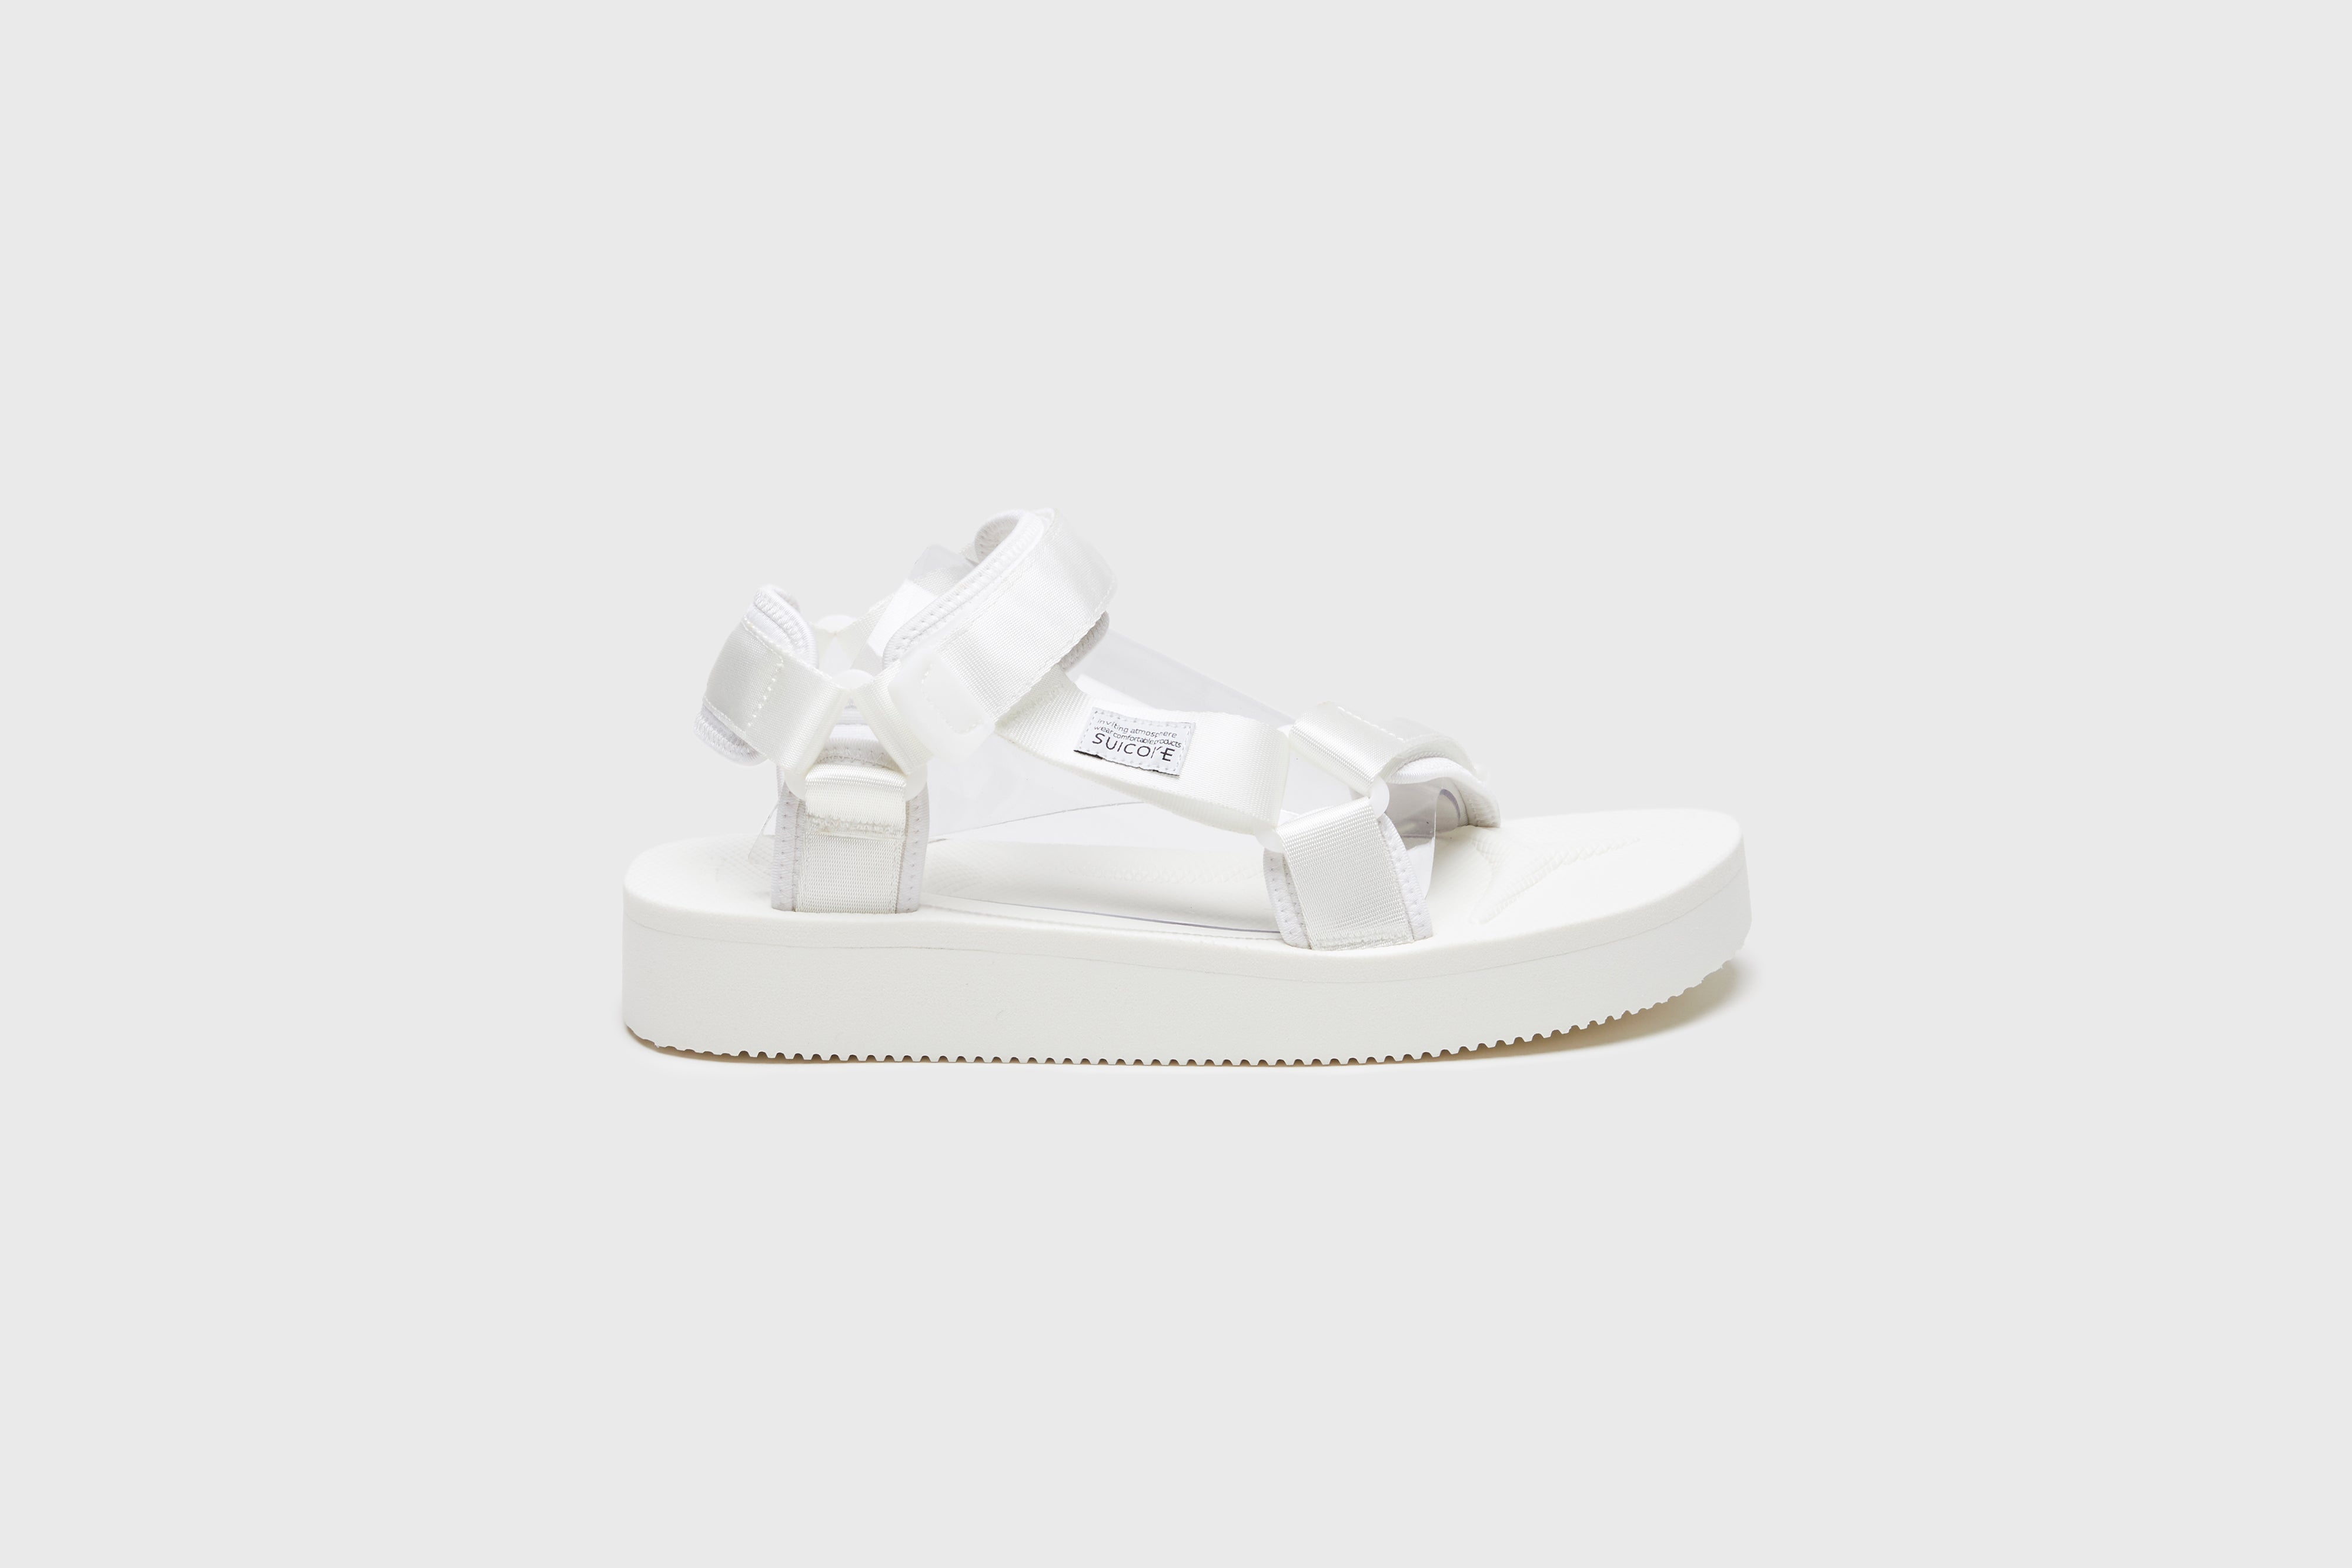 SUICOKE DEPA-2PO sandals with white nylon upper, white midsole and sole, strap and logo patch. From Spring/Summer 2023 collection on eightywingold Web Store, an official partner of SUICOKE. OG-022-2PO WHITE